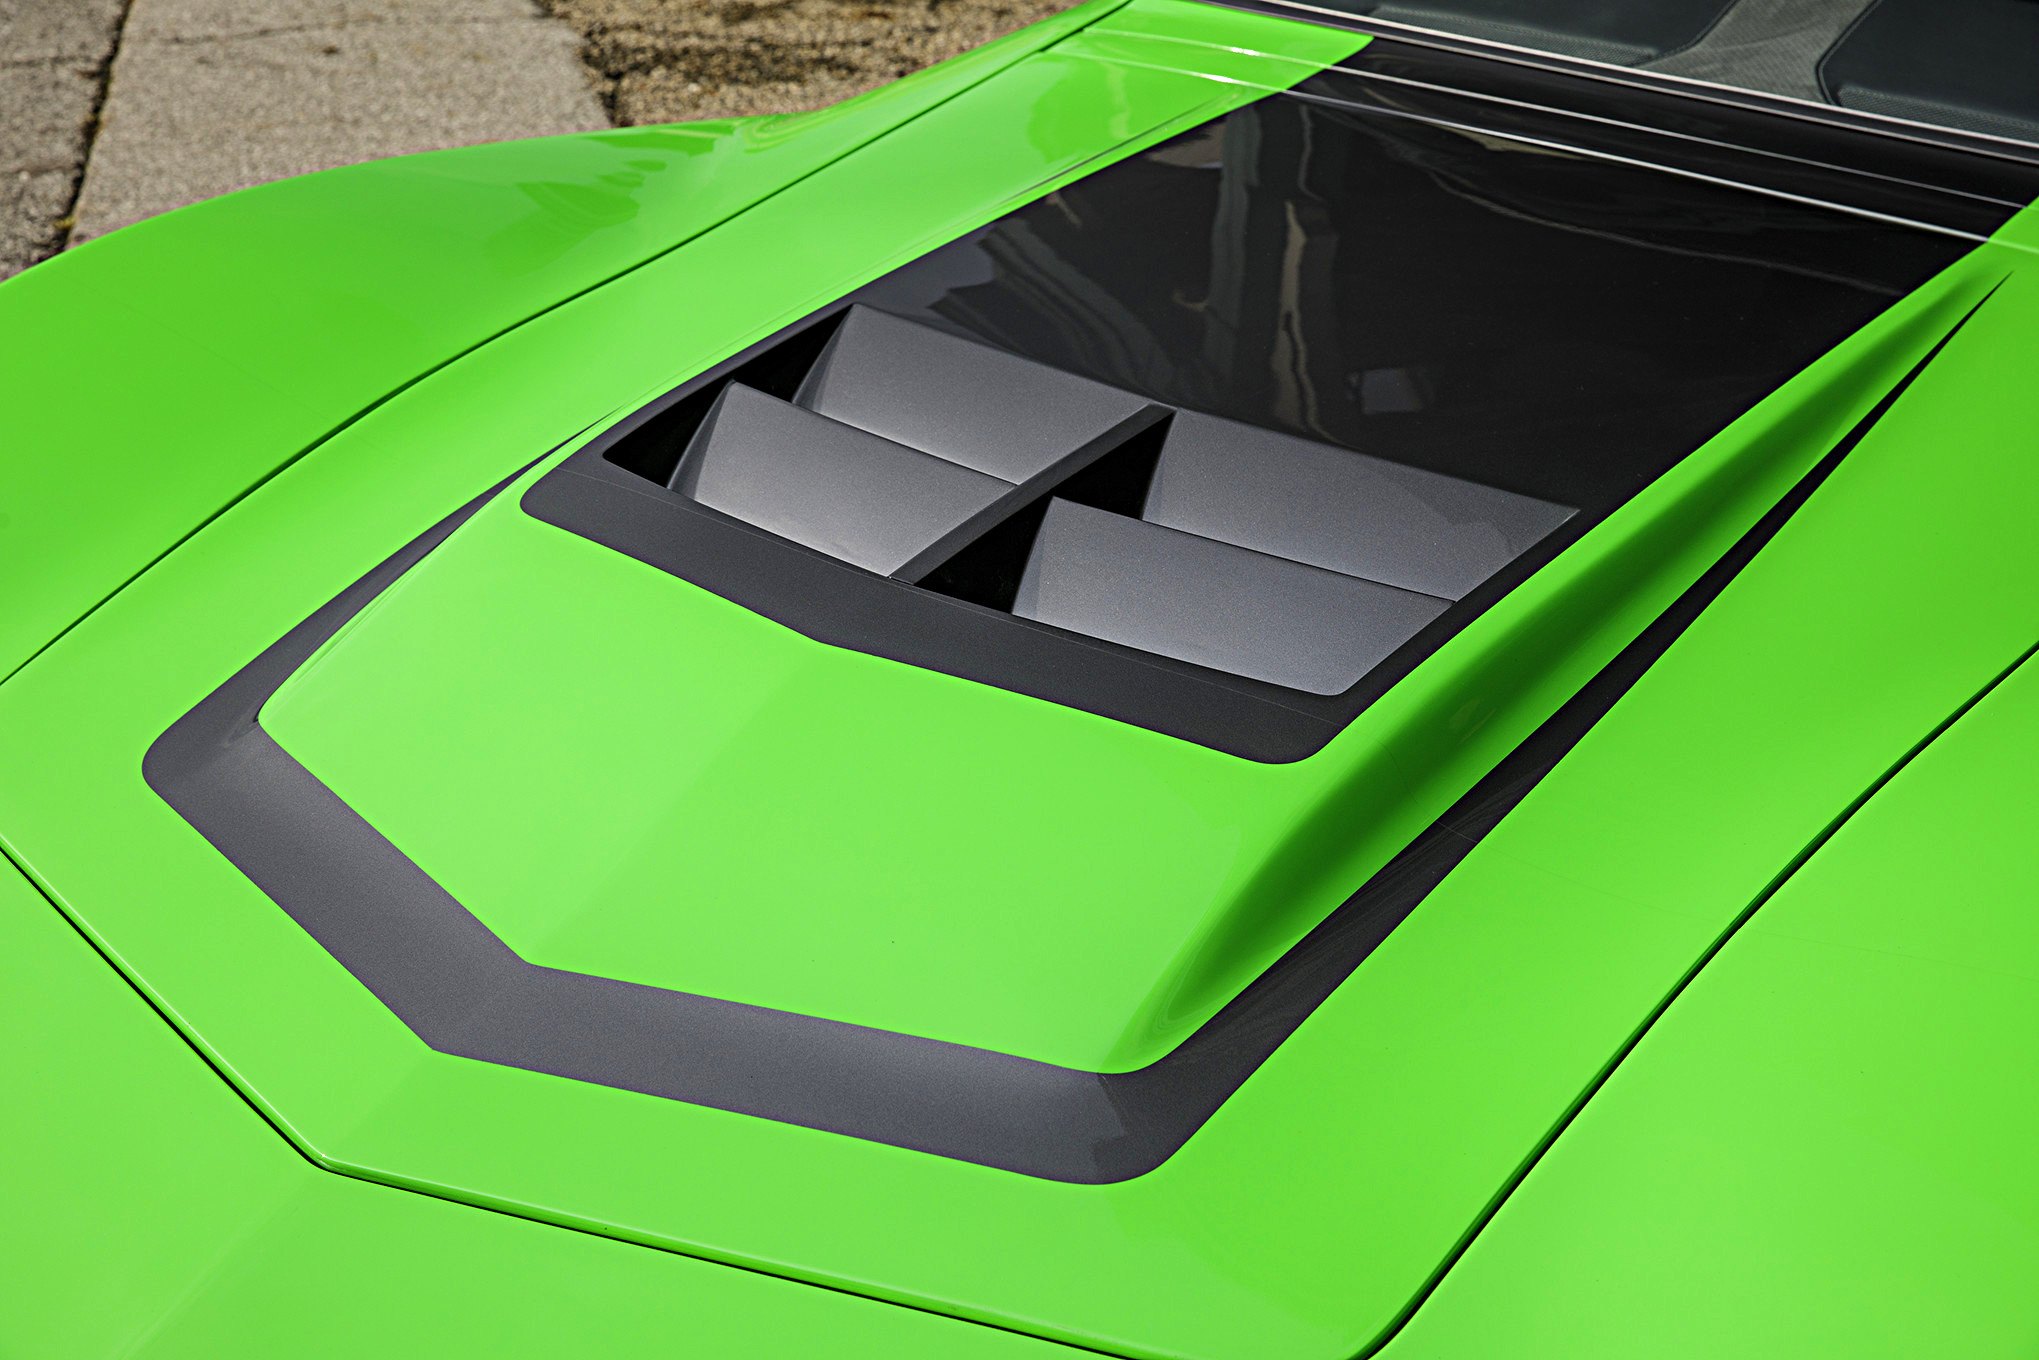 Green Debadged Chevy Corvette with Vented Hood - Photo by Robert McGaffin